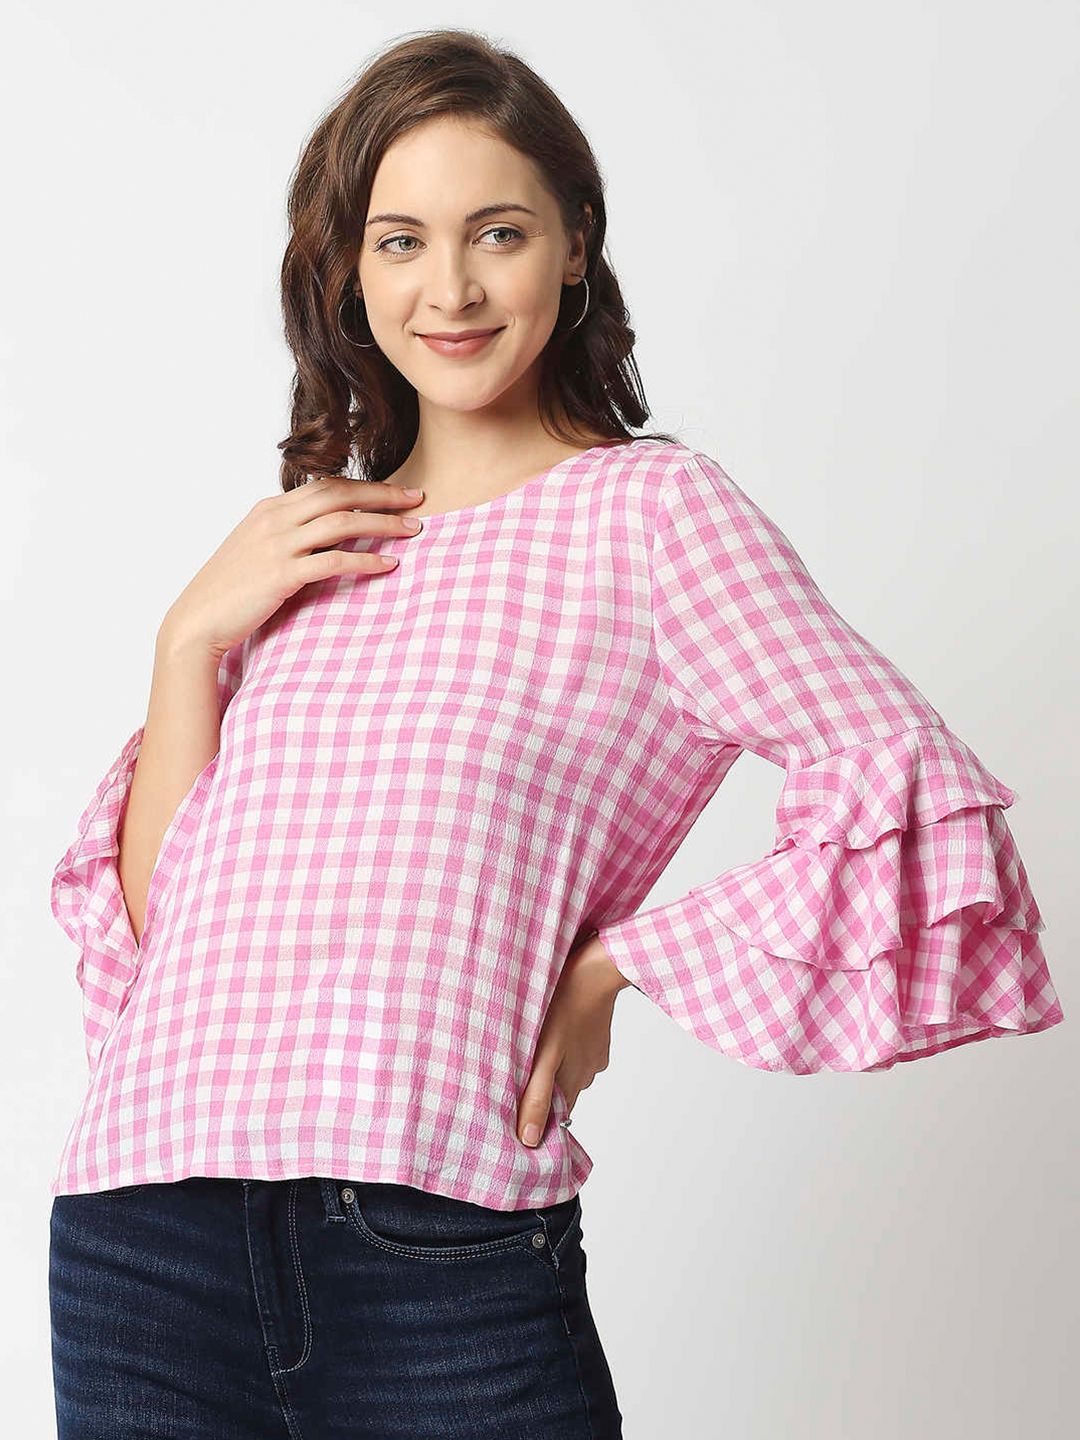 Pepe Jeans Pink Checked Top Price in India